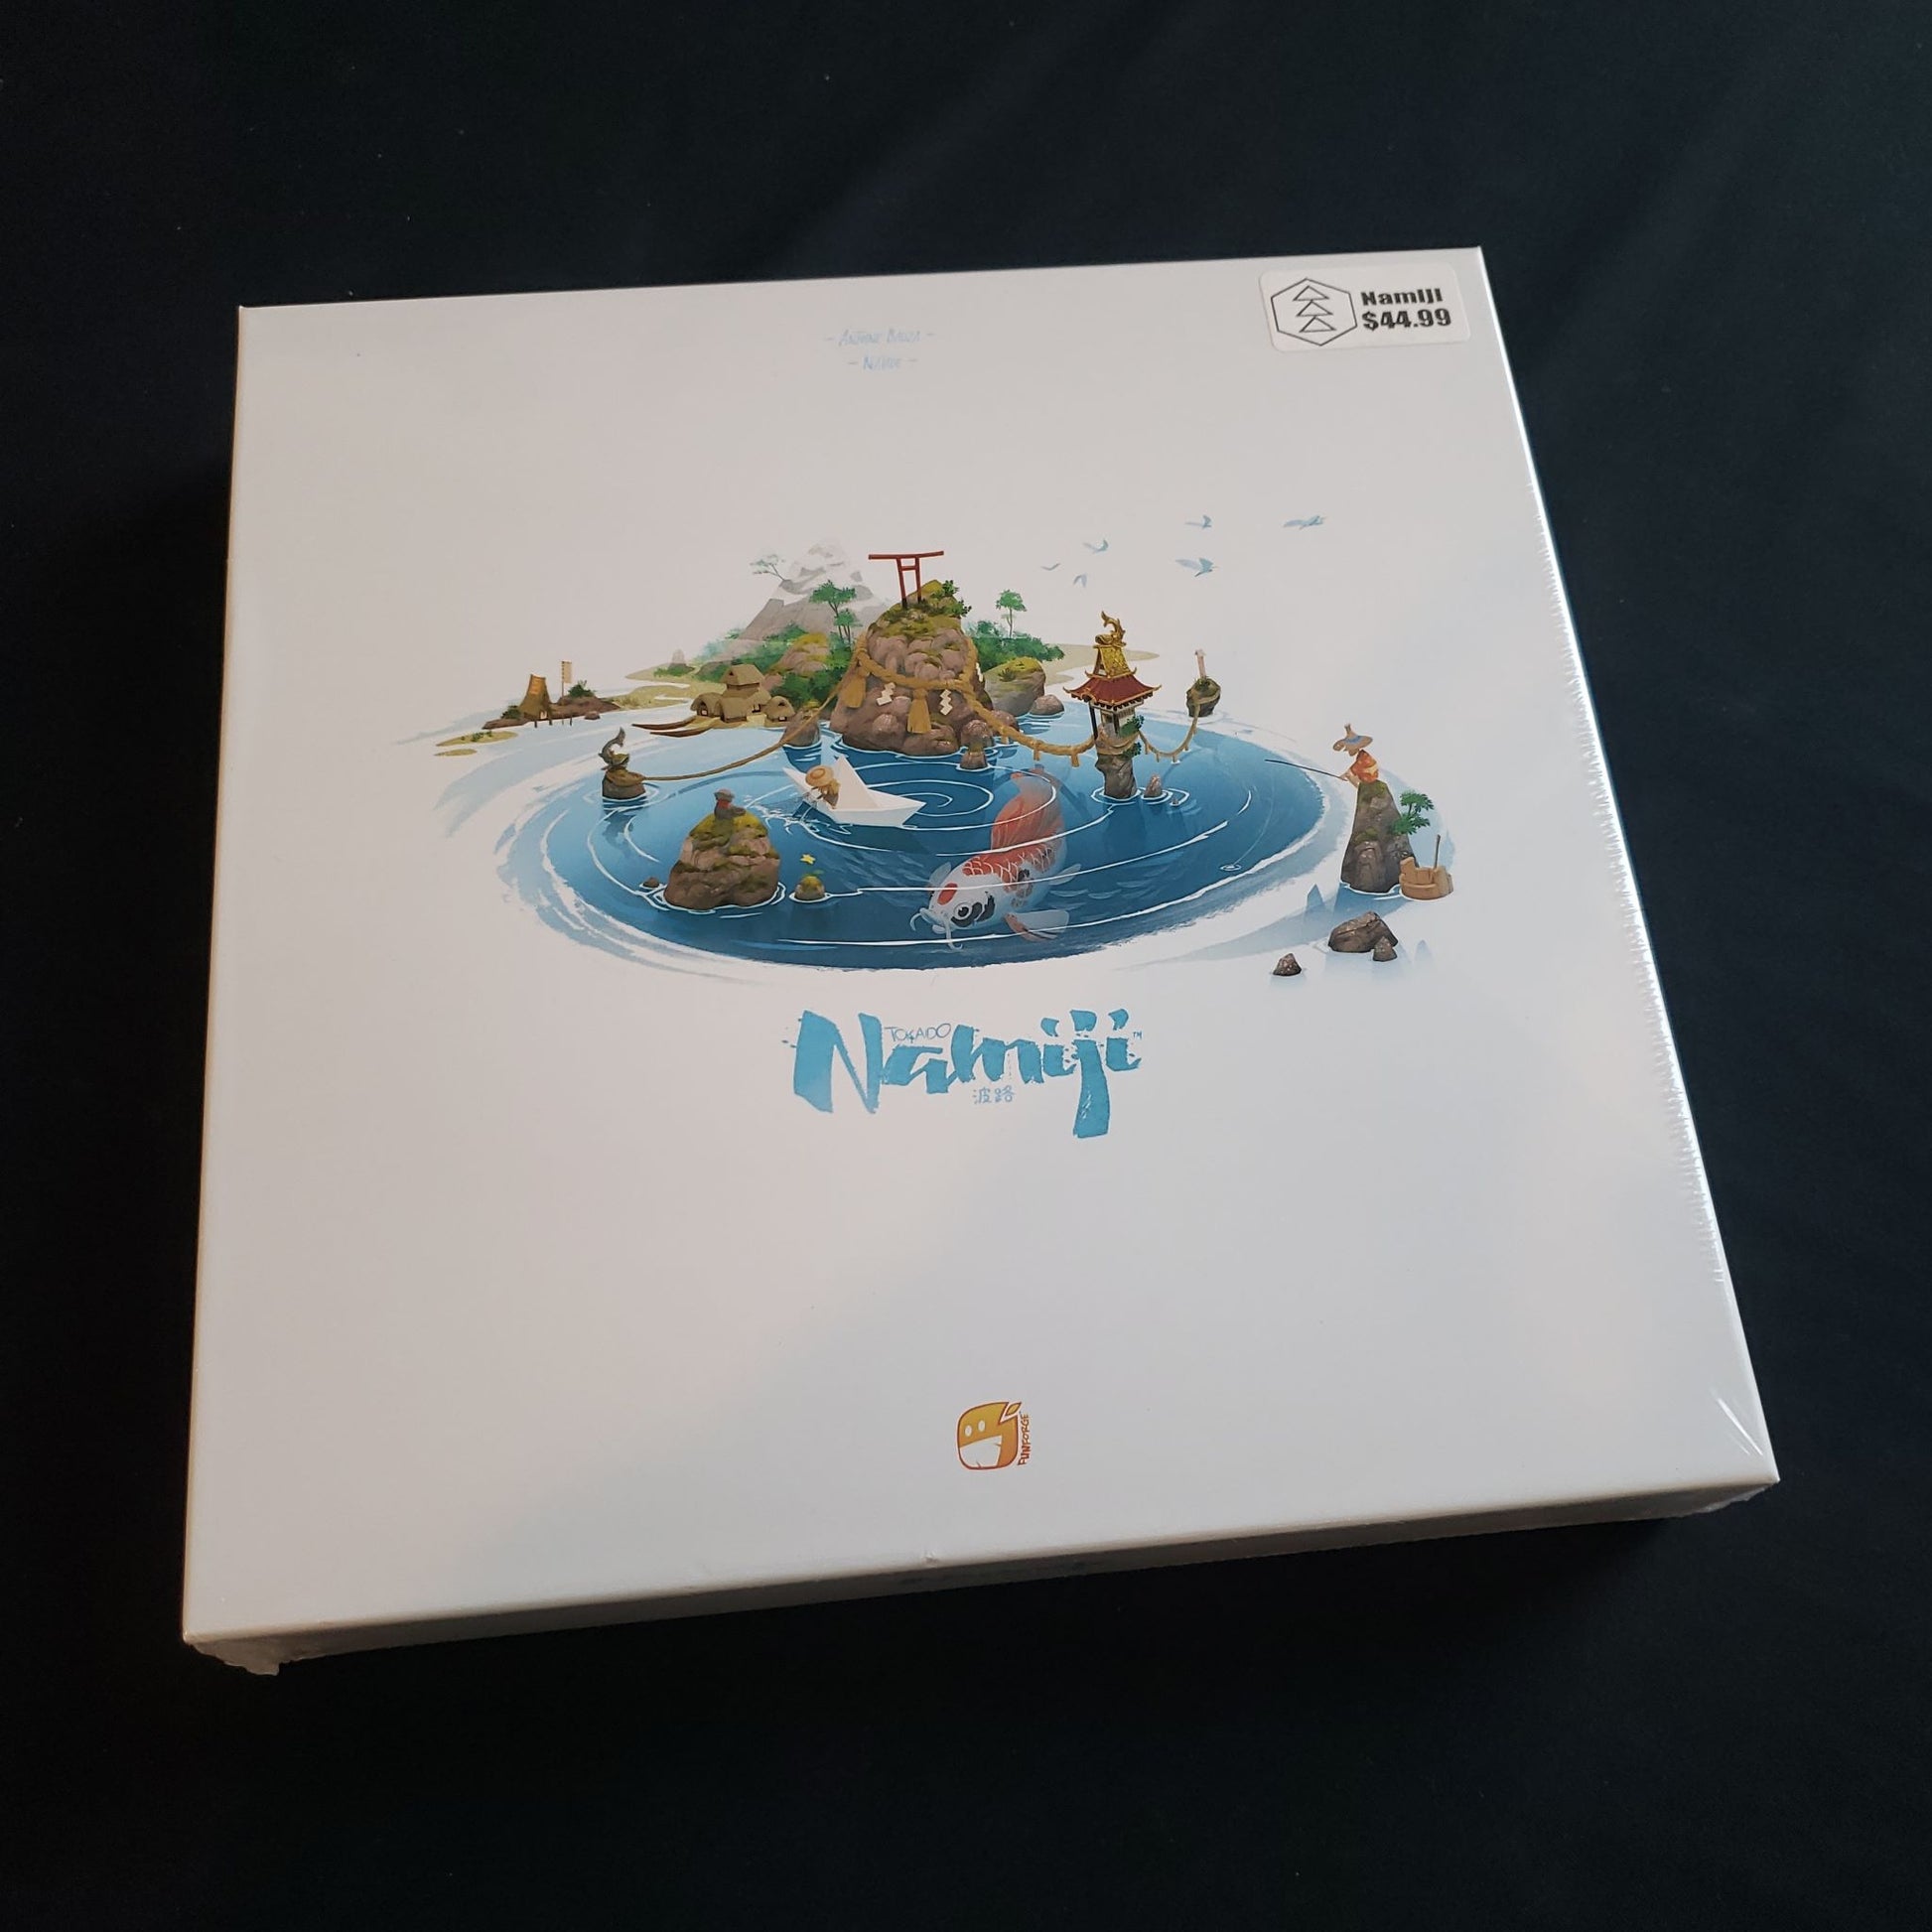 Namiji board game - front cover of box